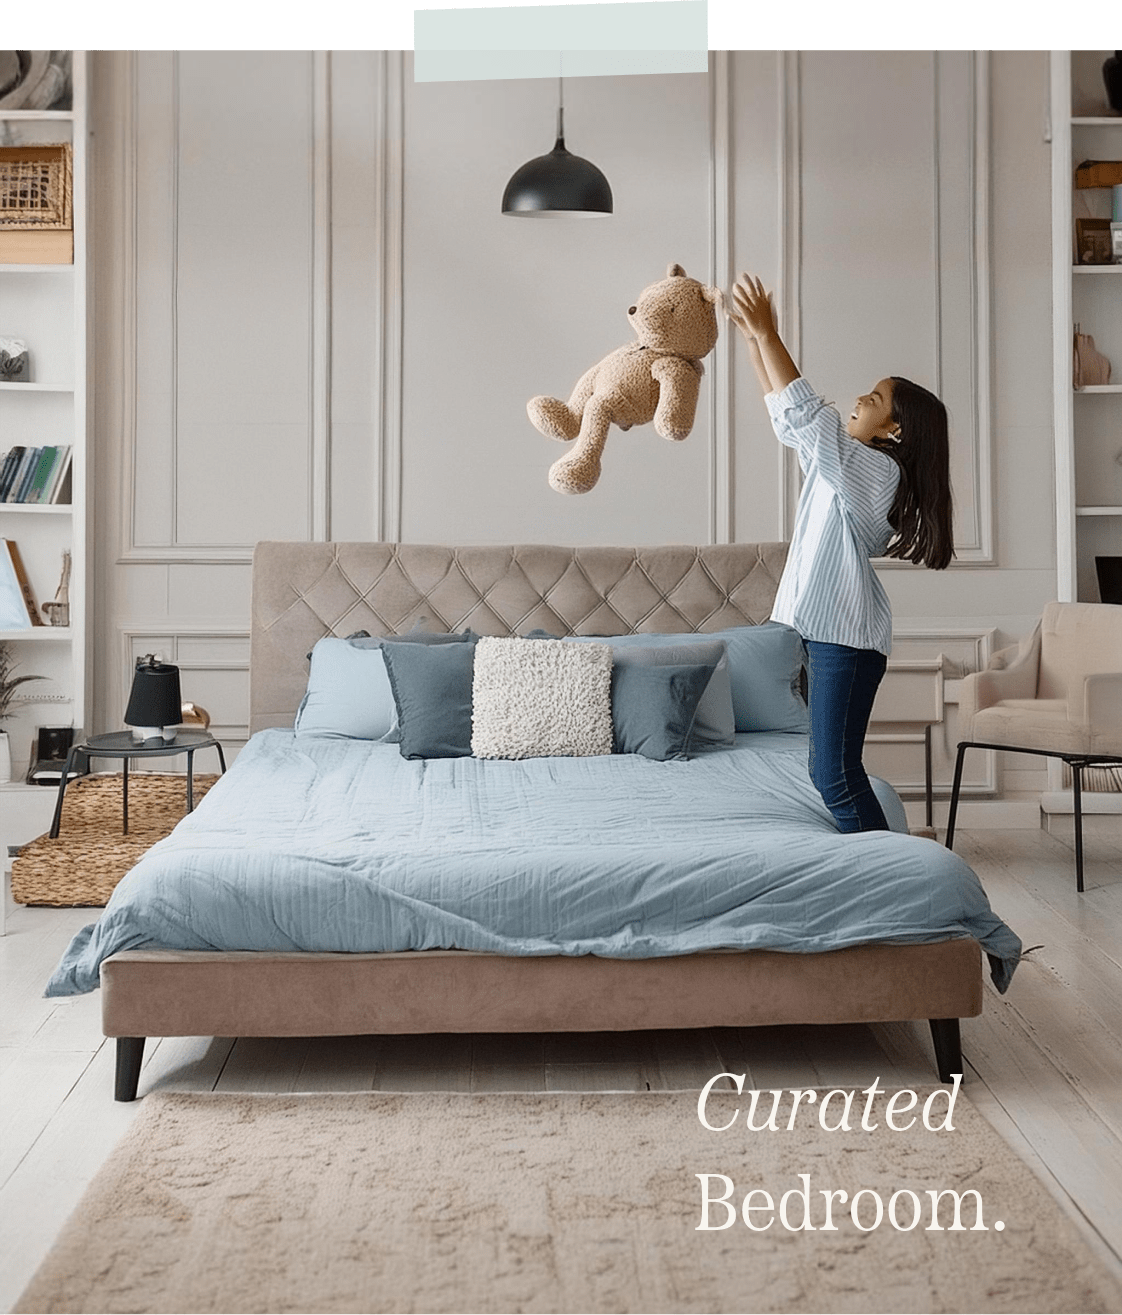 Girl throwing her teddy bear in the air while inside her bedroom